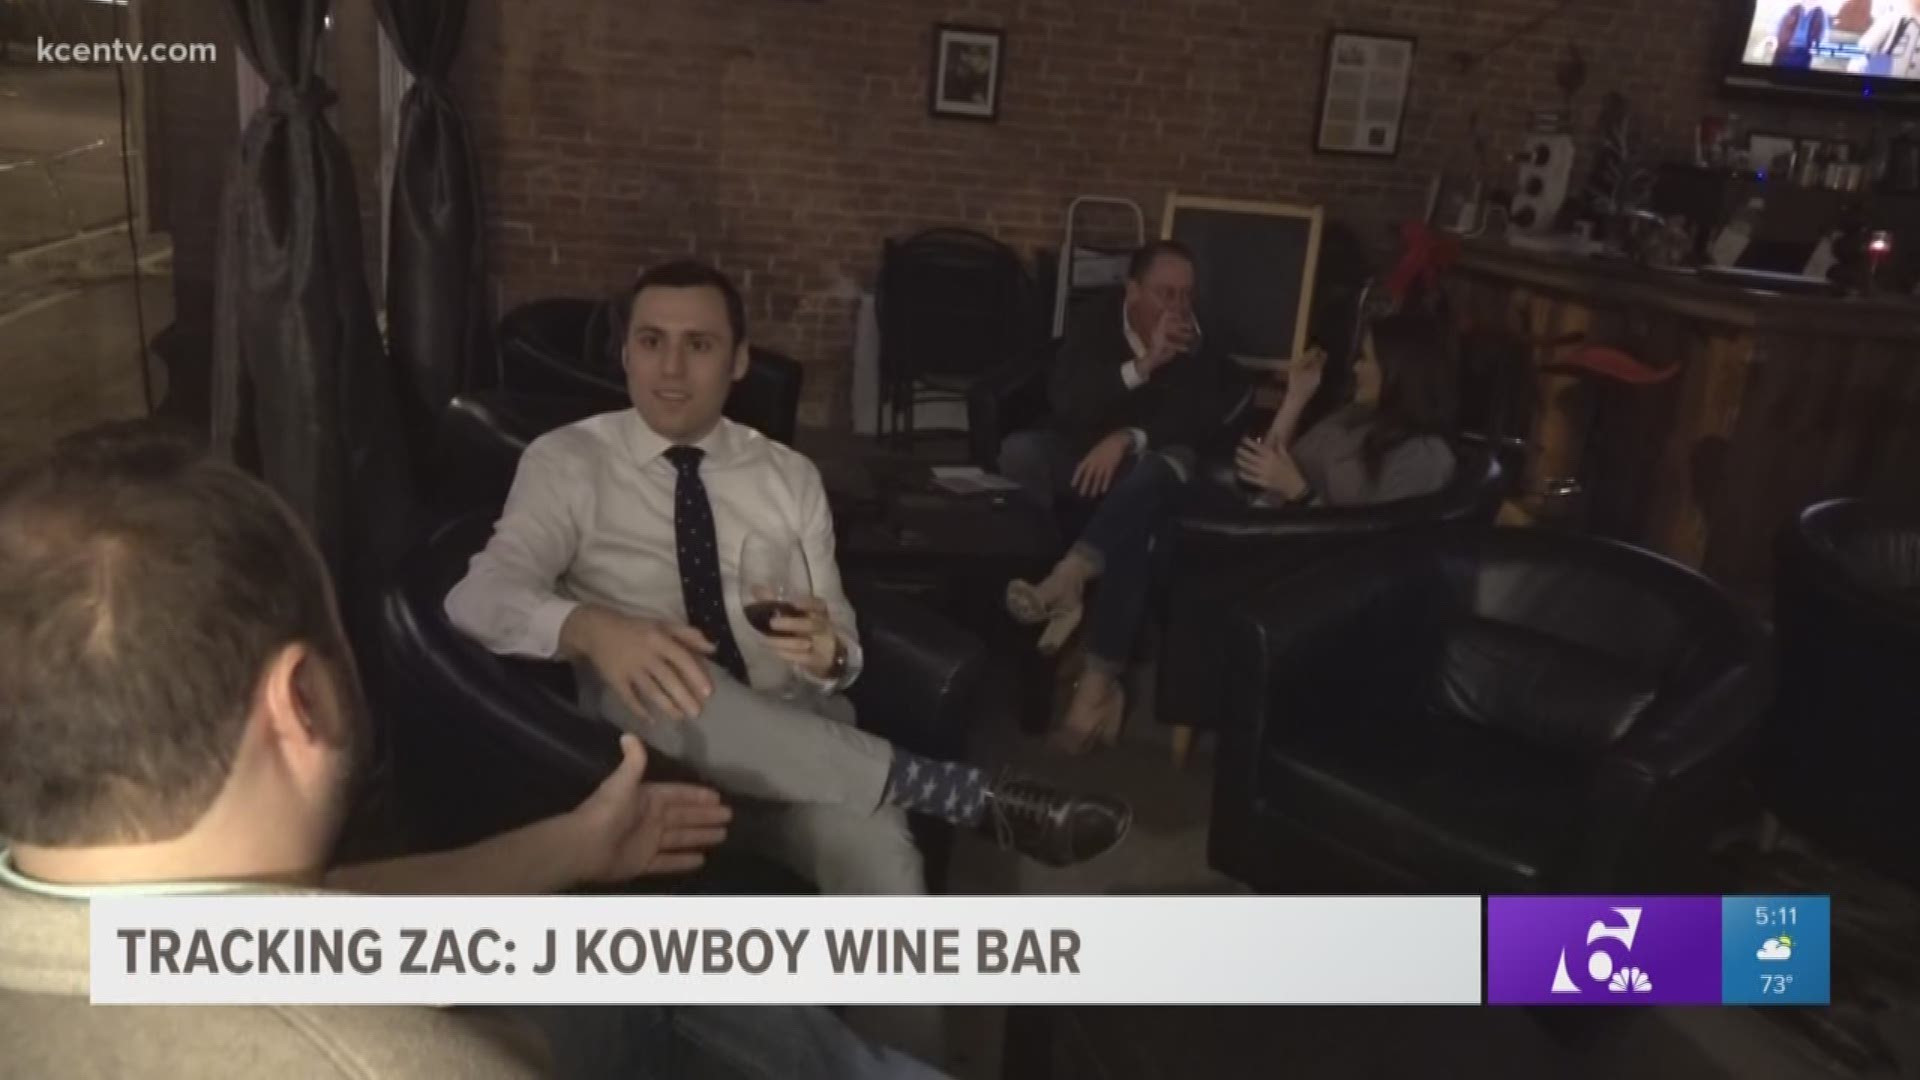 Zac went to J Kowboy Wine Bar, which features a relaxing atmosphere perfect for wine connoisseurs looking for new wines to taste.